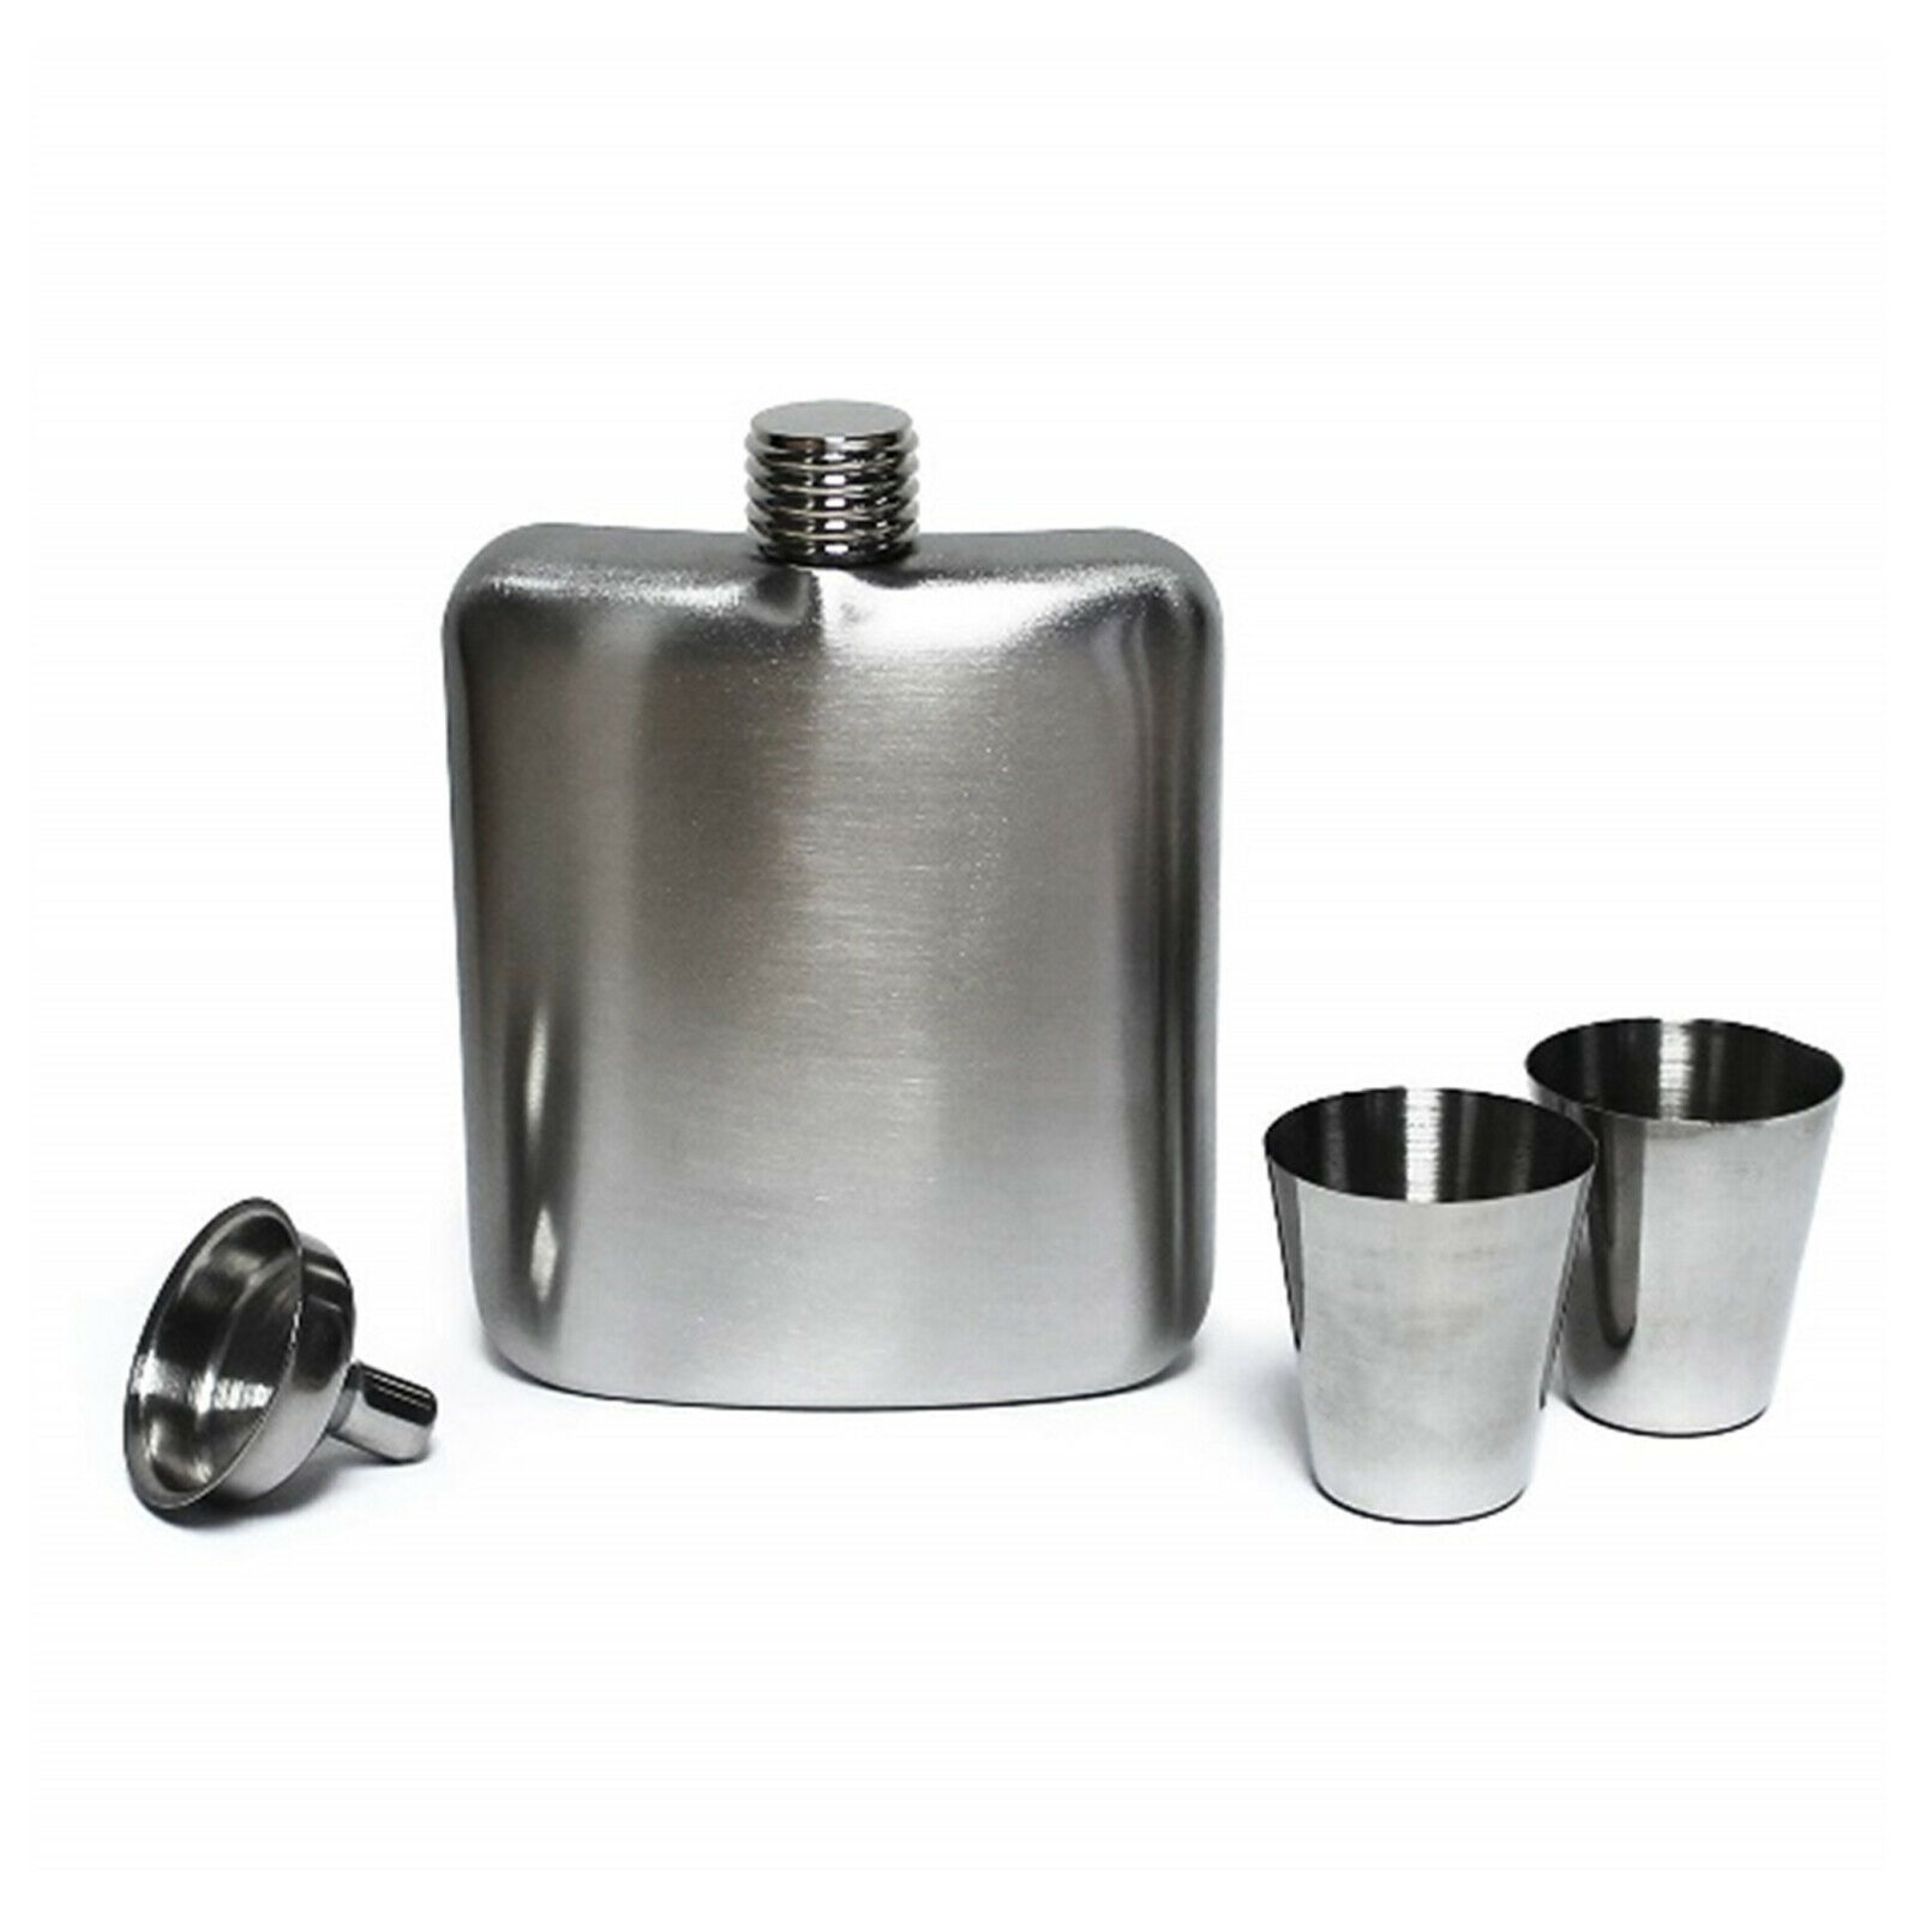 Boxed 6Oz Stainless Steel Hip Flask, Funnel / Pourer plus 2 Shot Cups - 10 Sets Total RRP £125